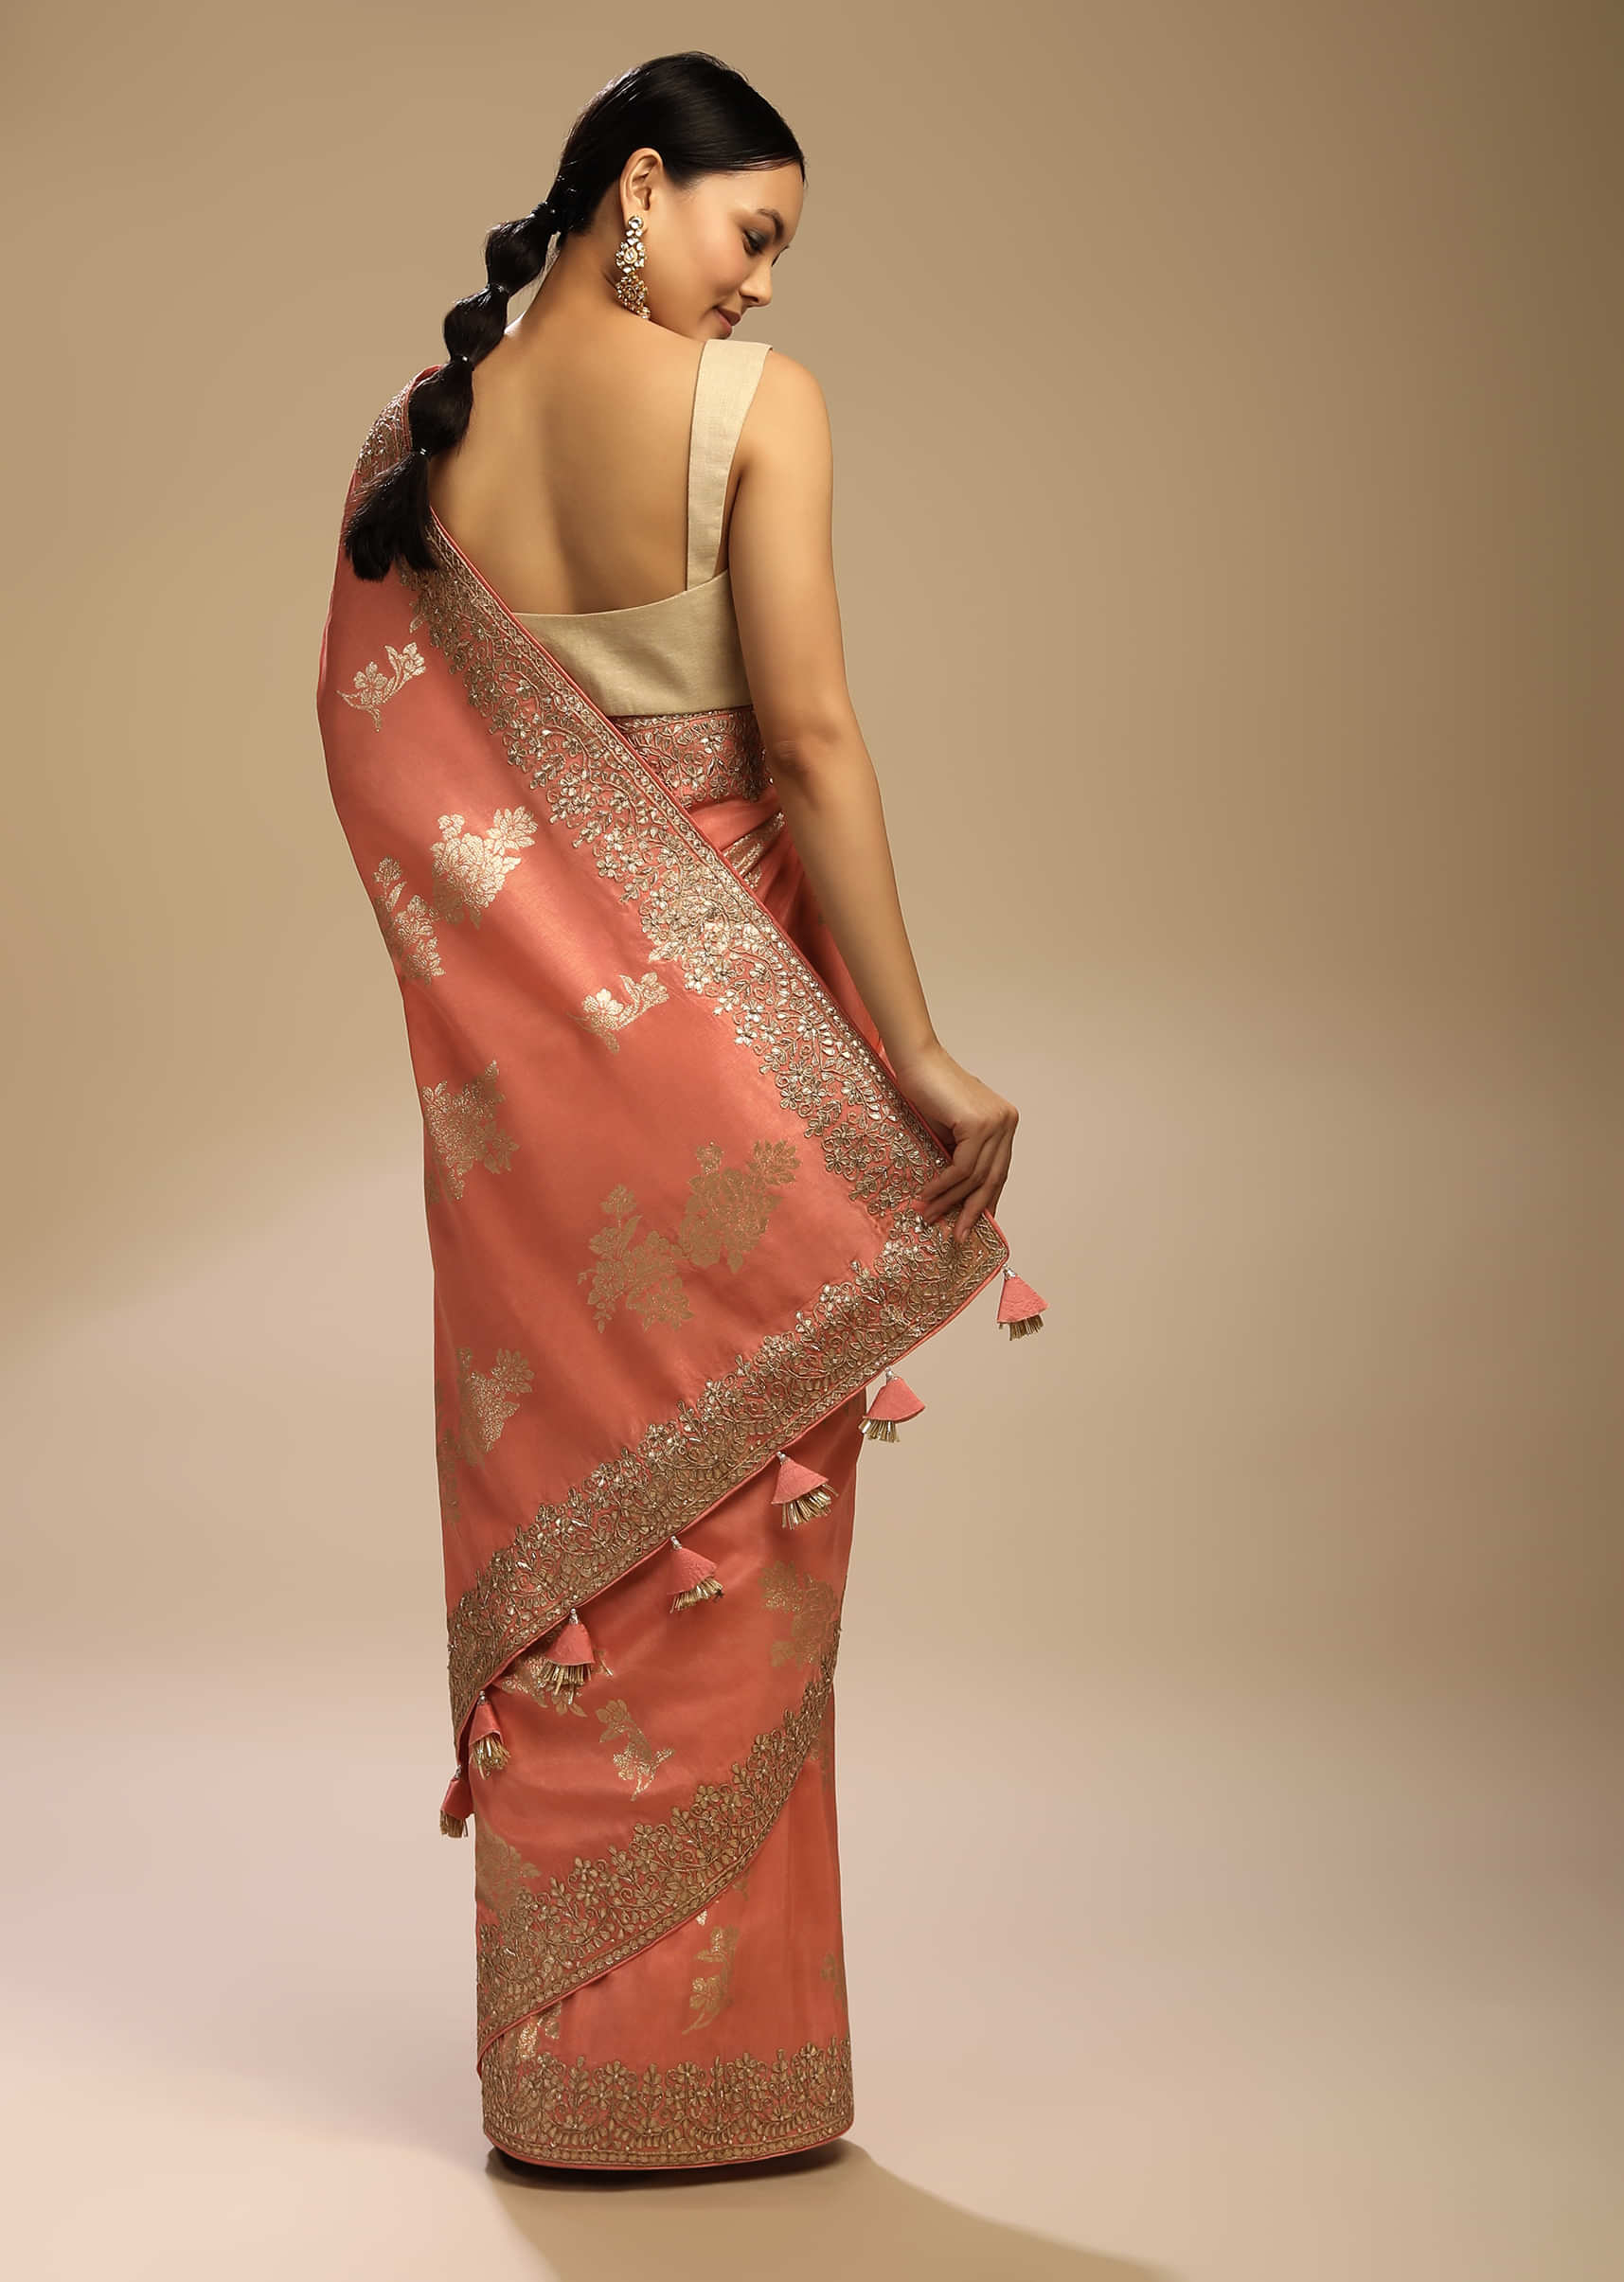 Peach Amber Saree In Dupion Silk With Woven Floral Motifs And Gotta Embroidered Floral Border